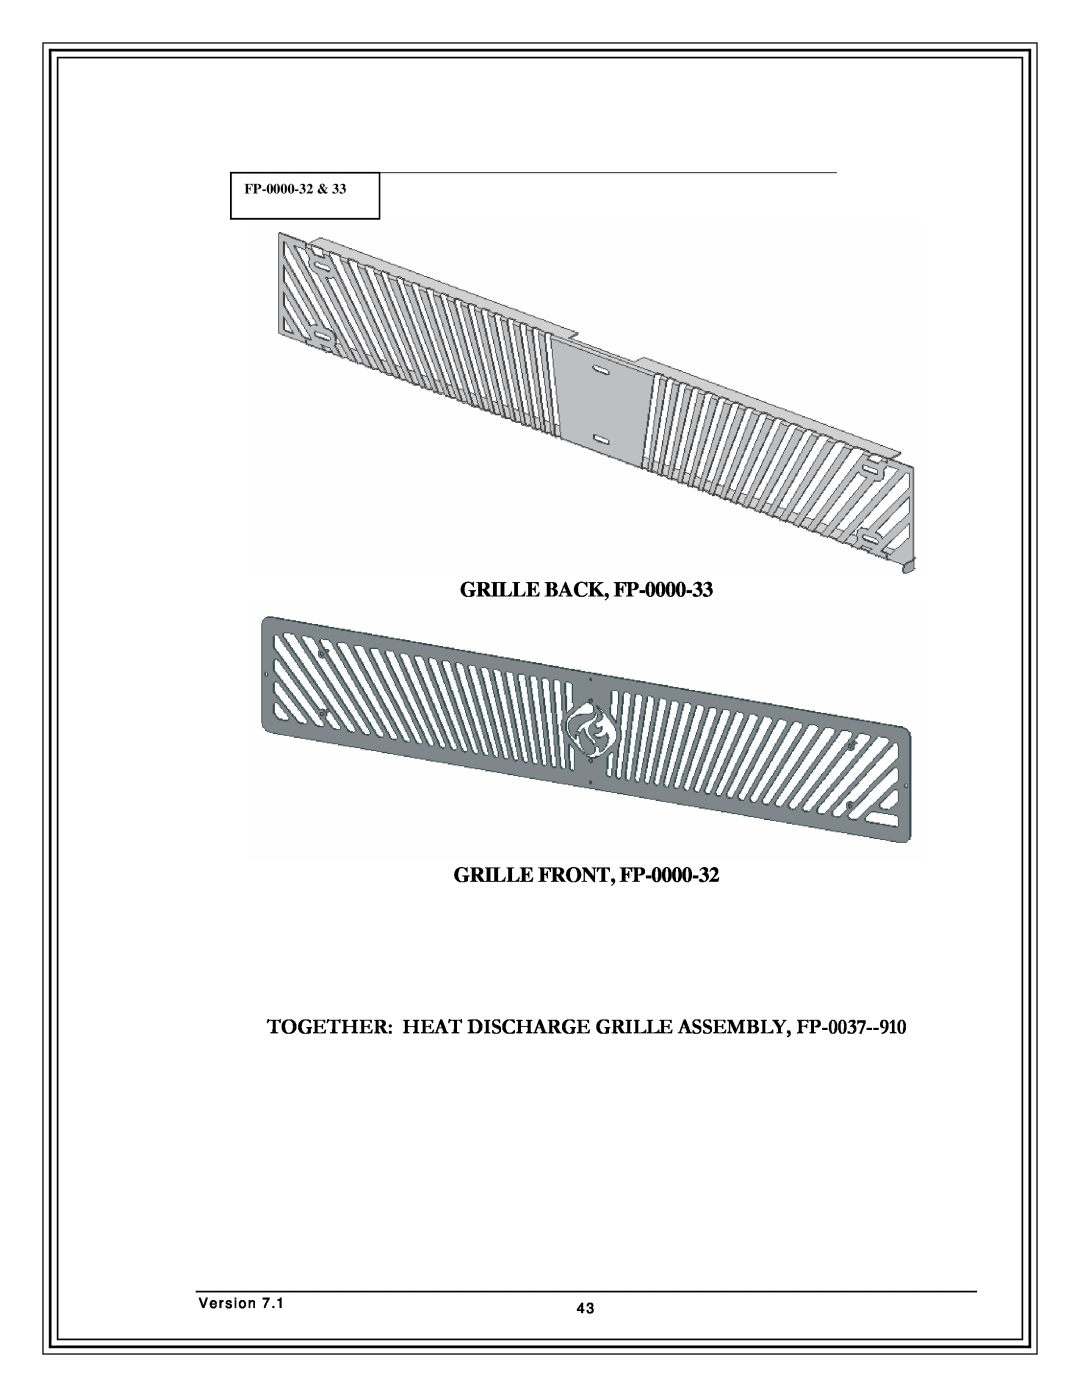 Country Flame FP42, FP37, Fireplace FP33 manual GRILLE BACK, FP-0000-33 GRILLE FRONT, FP-0000-32, Version 